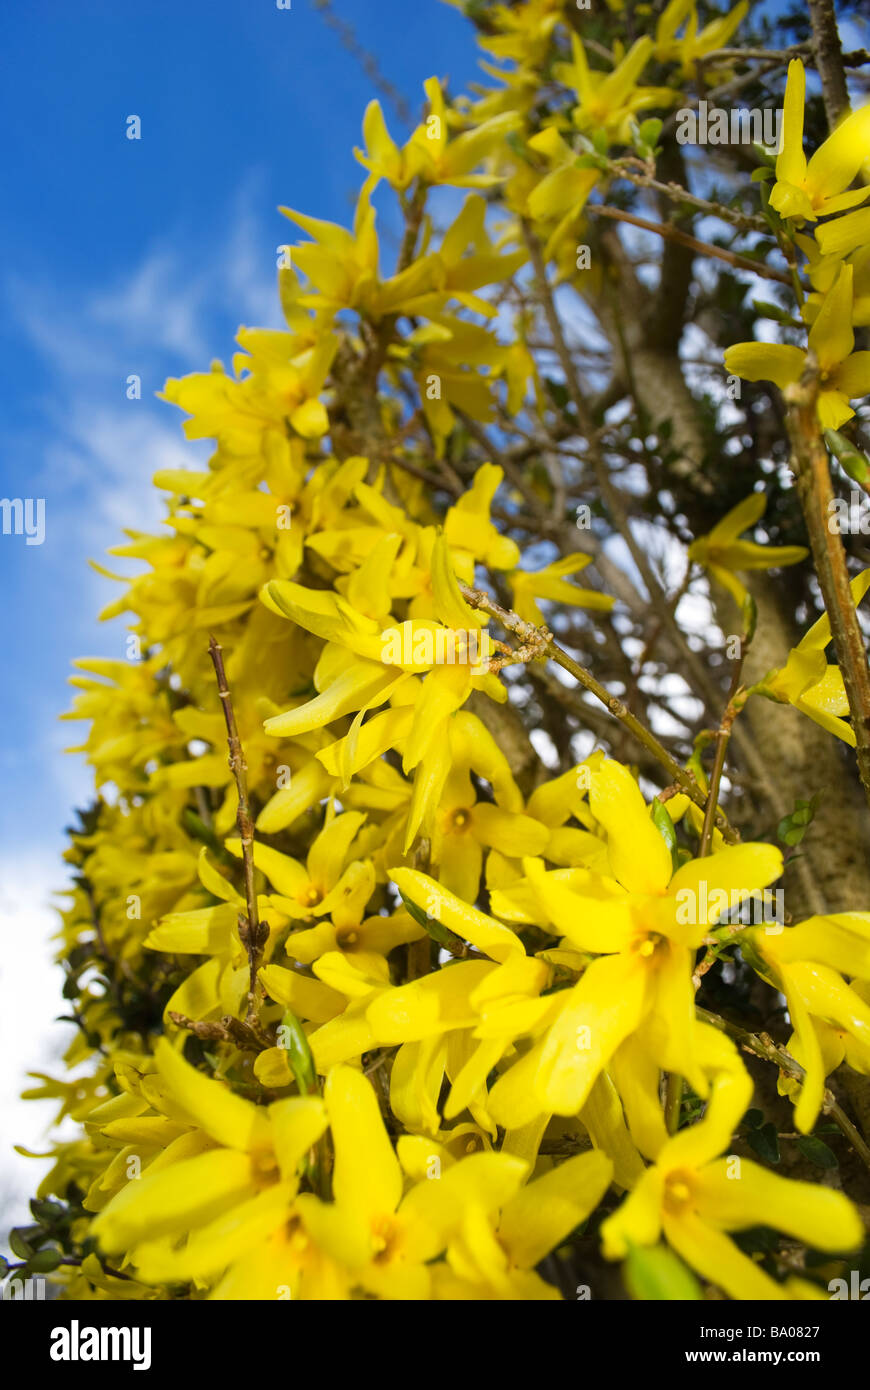 Forsythia in bloom bright yellow flowering shrub flowering tree flowering bush flowering in the spring time Stock Photo